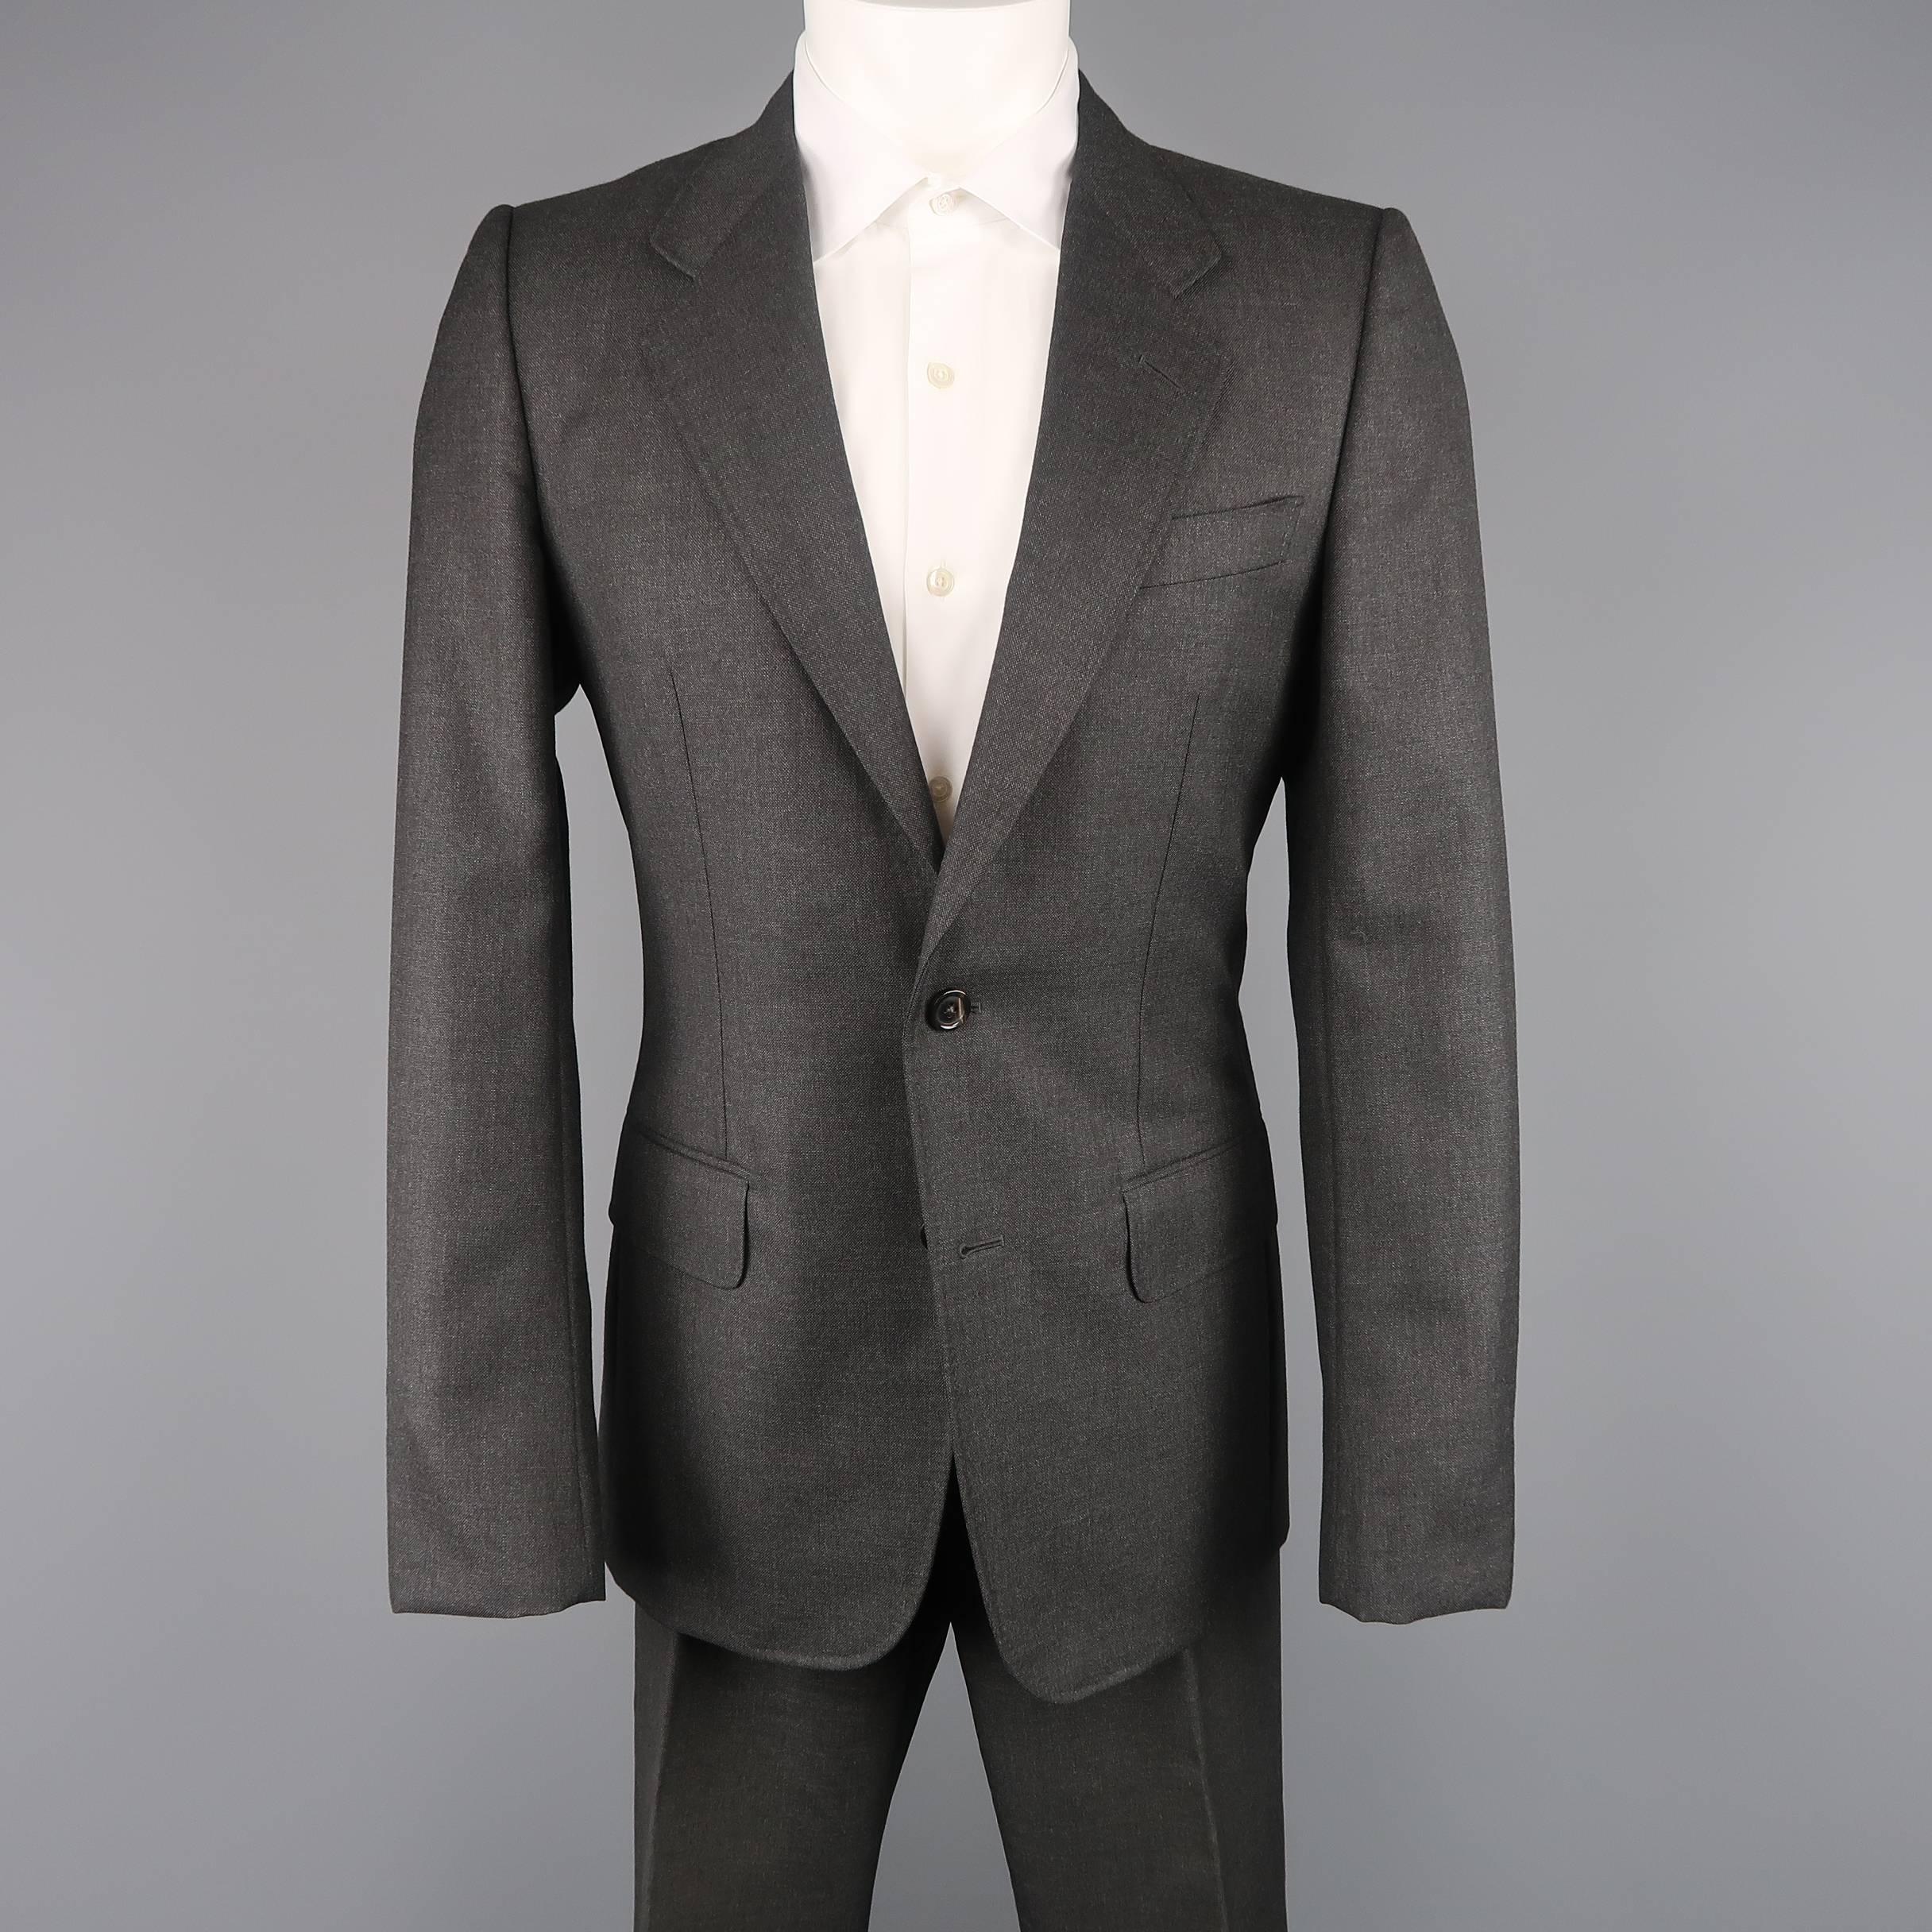 Two piece Yves Saint Laurent suit by Tom Ford comes in charcoal wool and includes a single breasted, two button sport coat with notch lapel and tab cuffs with matching flat front dress pants. Wear on pant liner. As is. Made in Italy.
 
Good